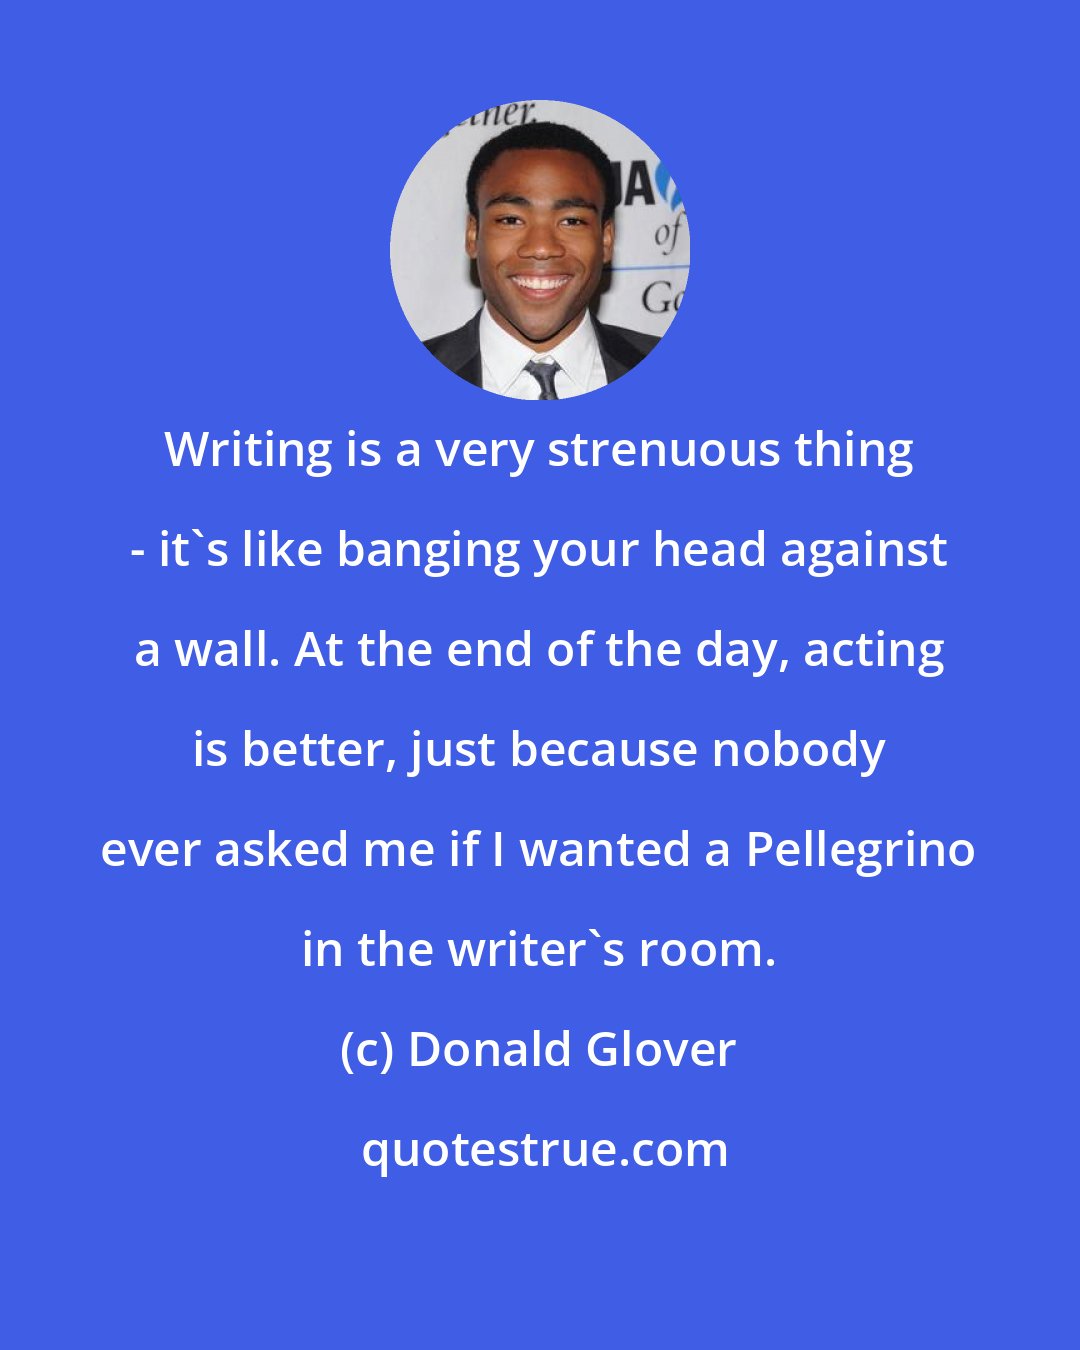 Donald Glover: Writing is a very strenuous thing - it's like banging your head against a wall. At the end of the day, acting is better, just because nobody ever asked me if I wanted a Pellegrino in the writer's room.